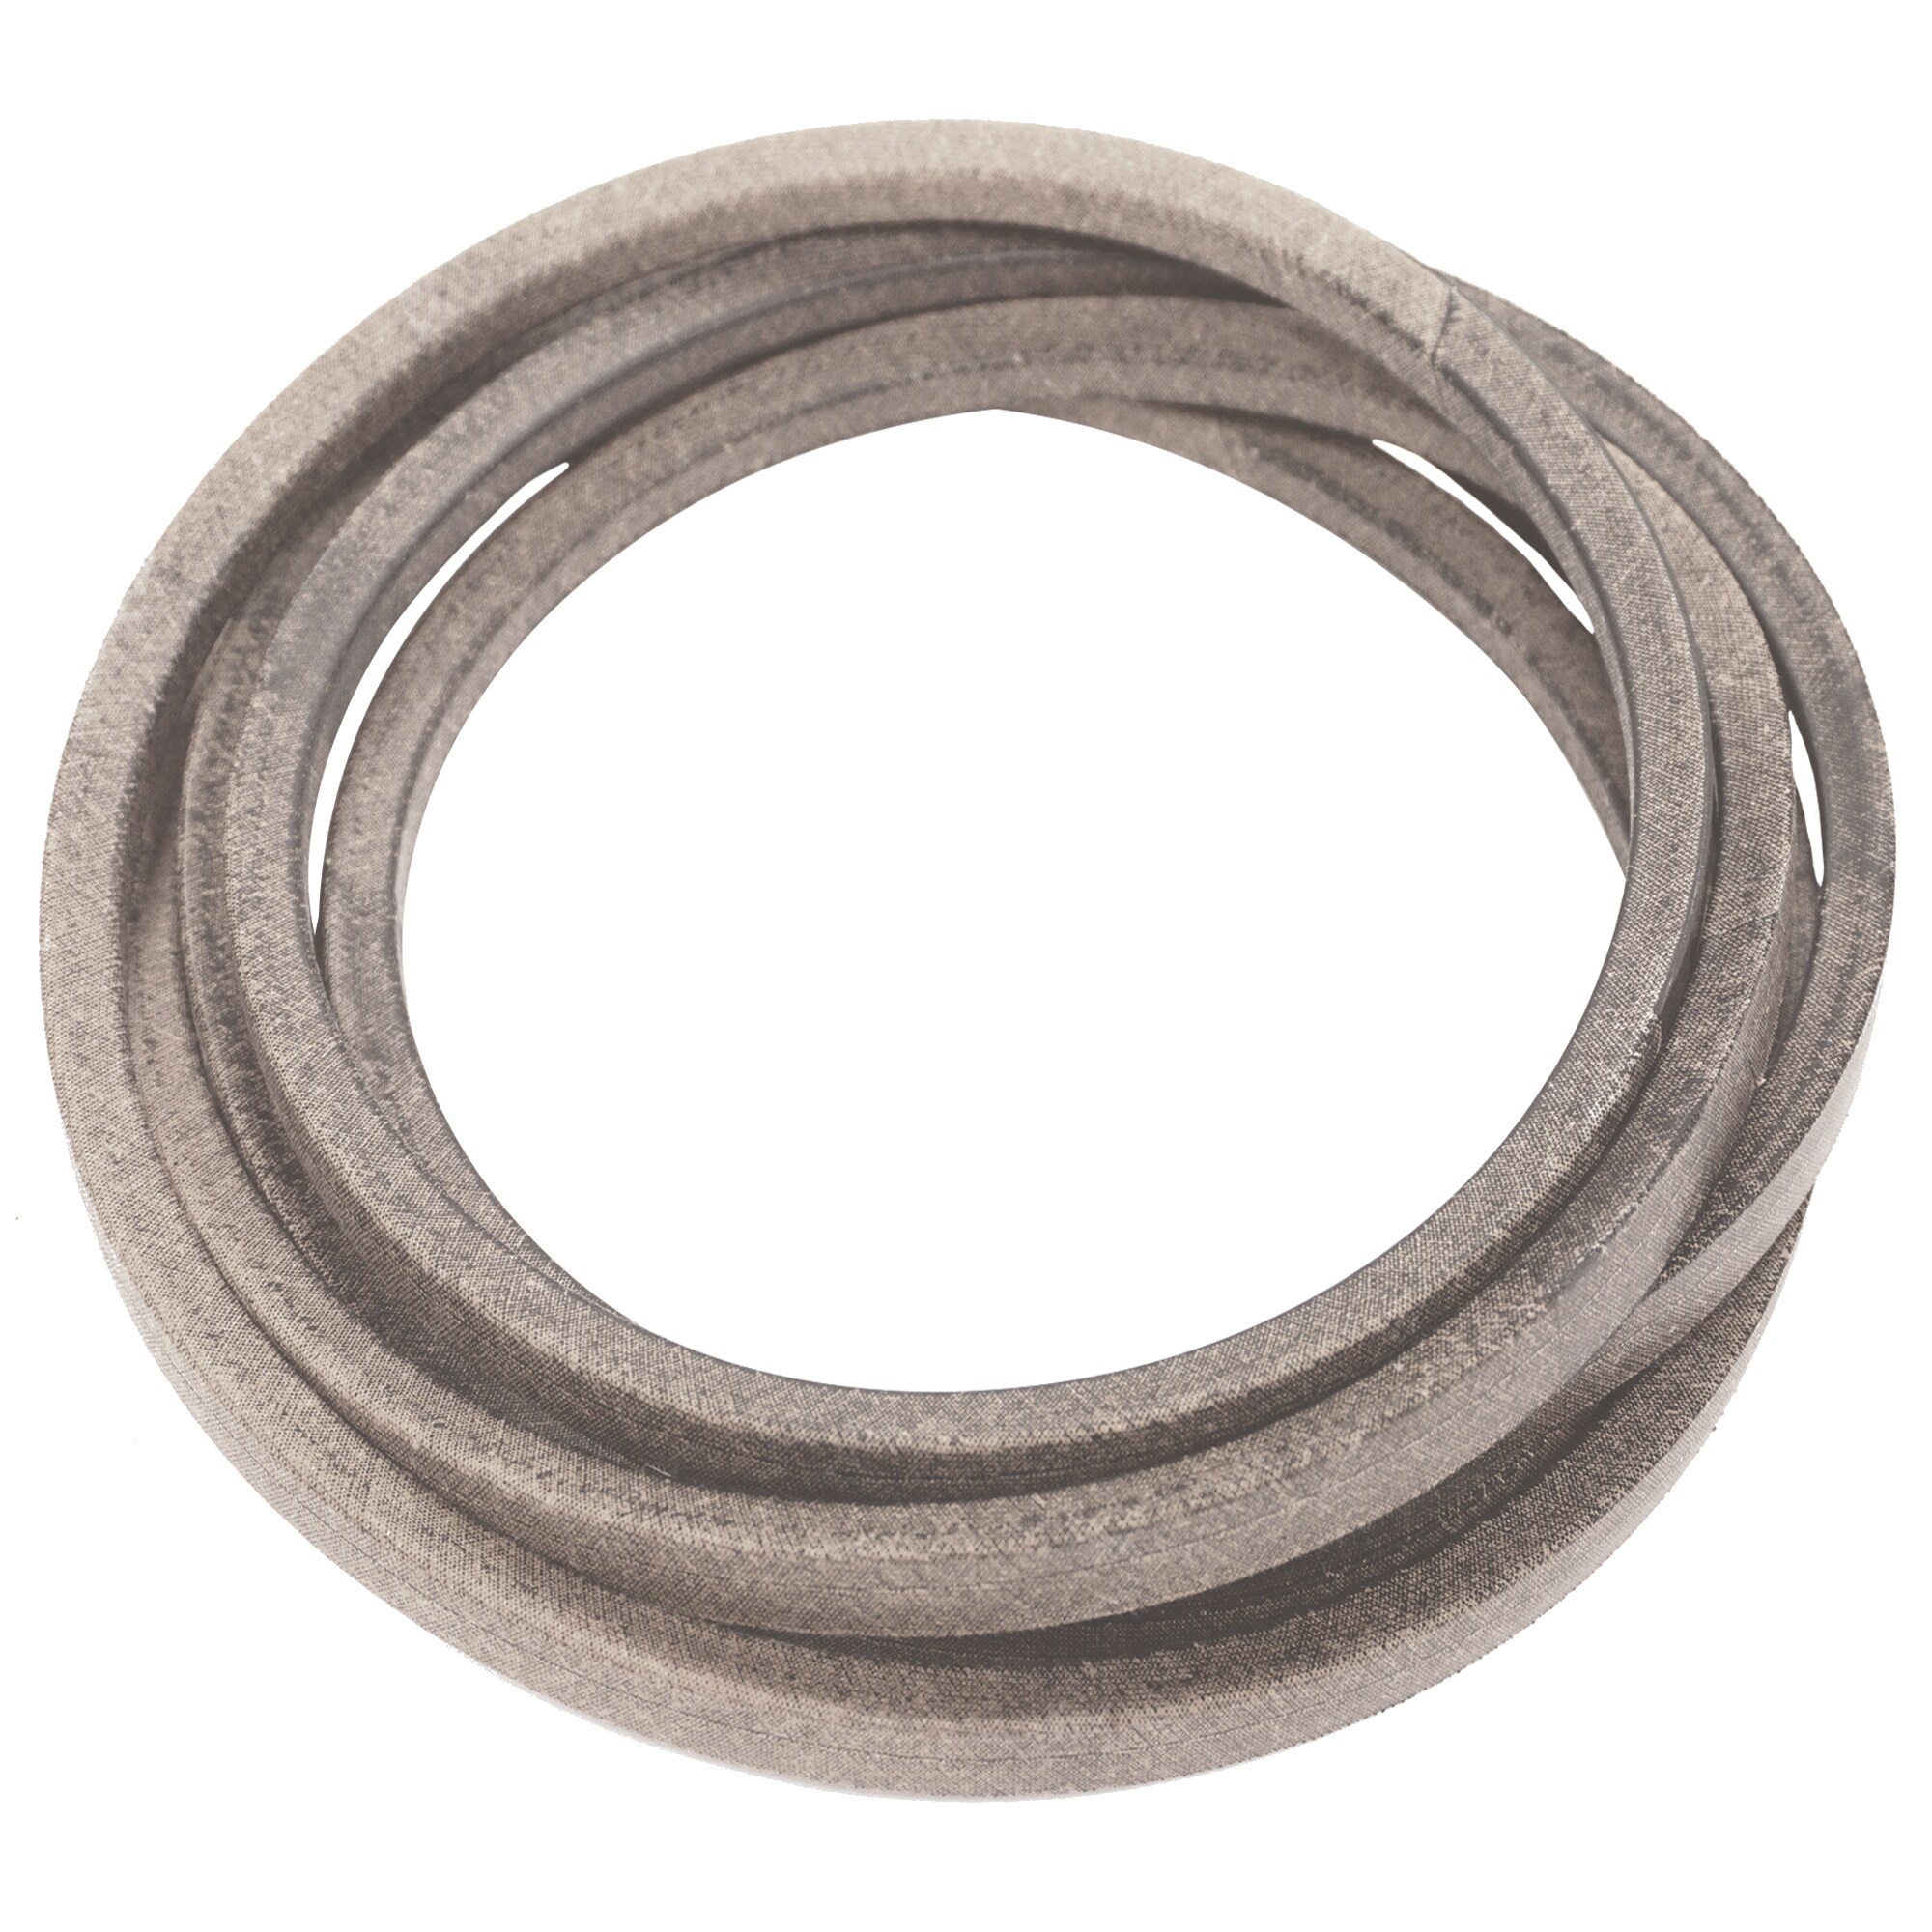 MTD 42-in Deck/Drive Belt for Riding Mower/Tractors in the Lawn